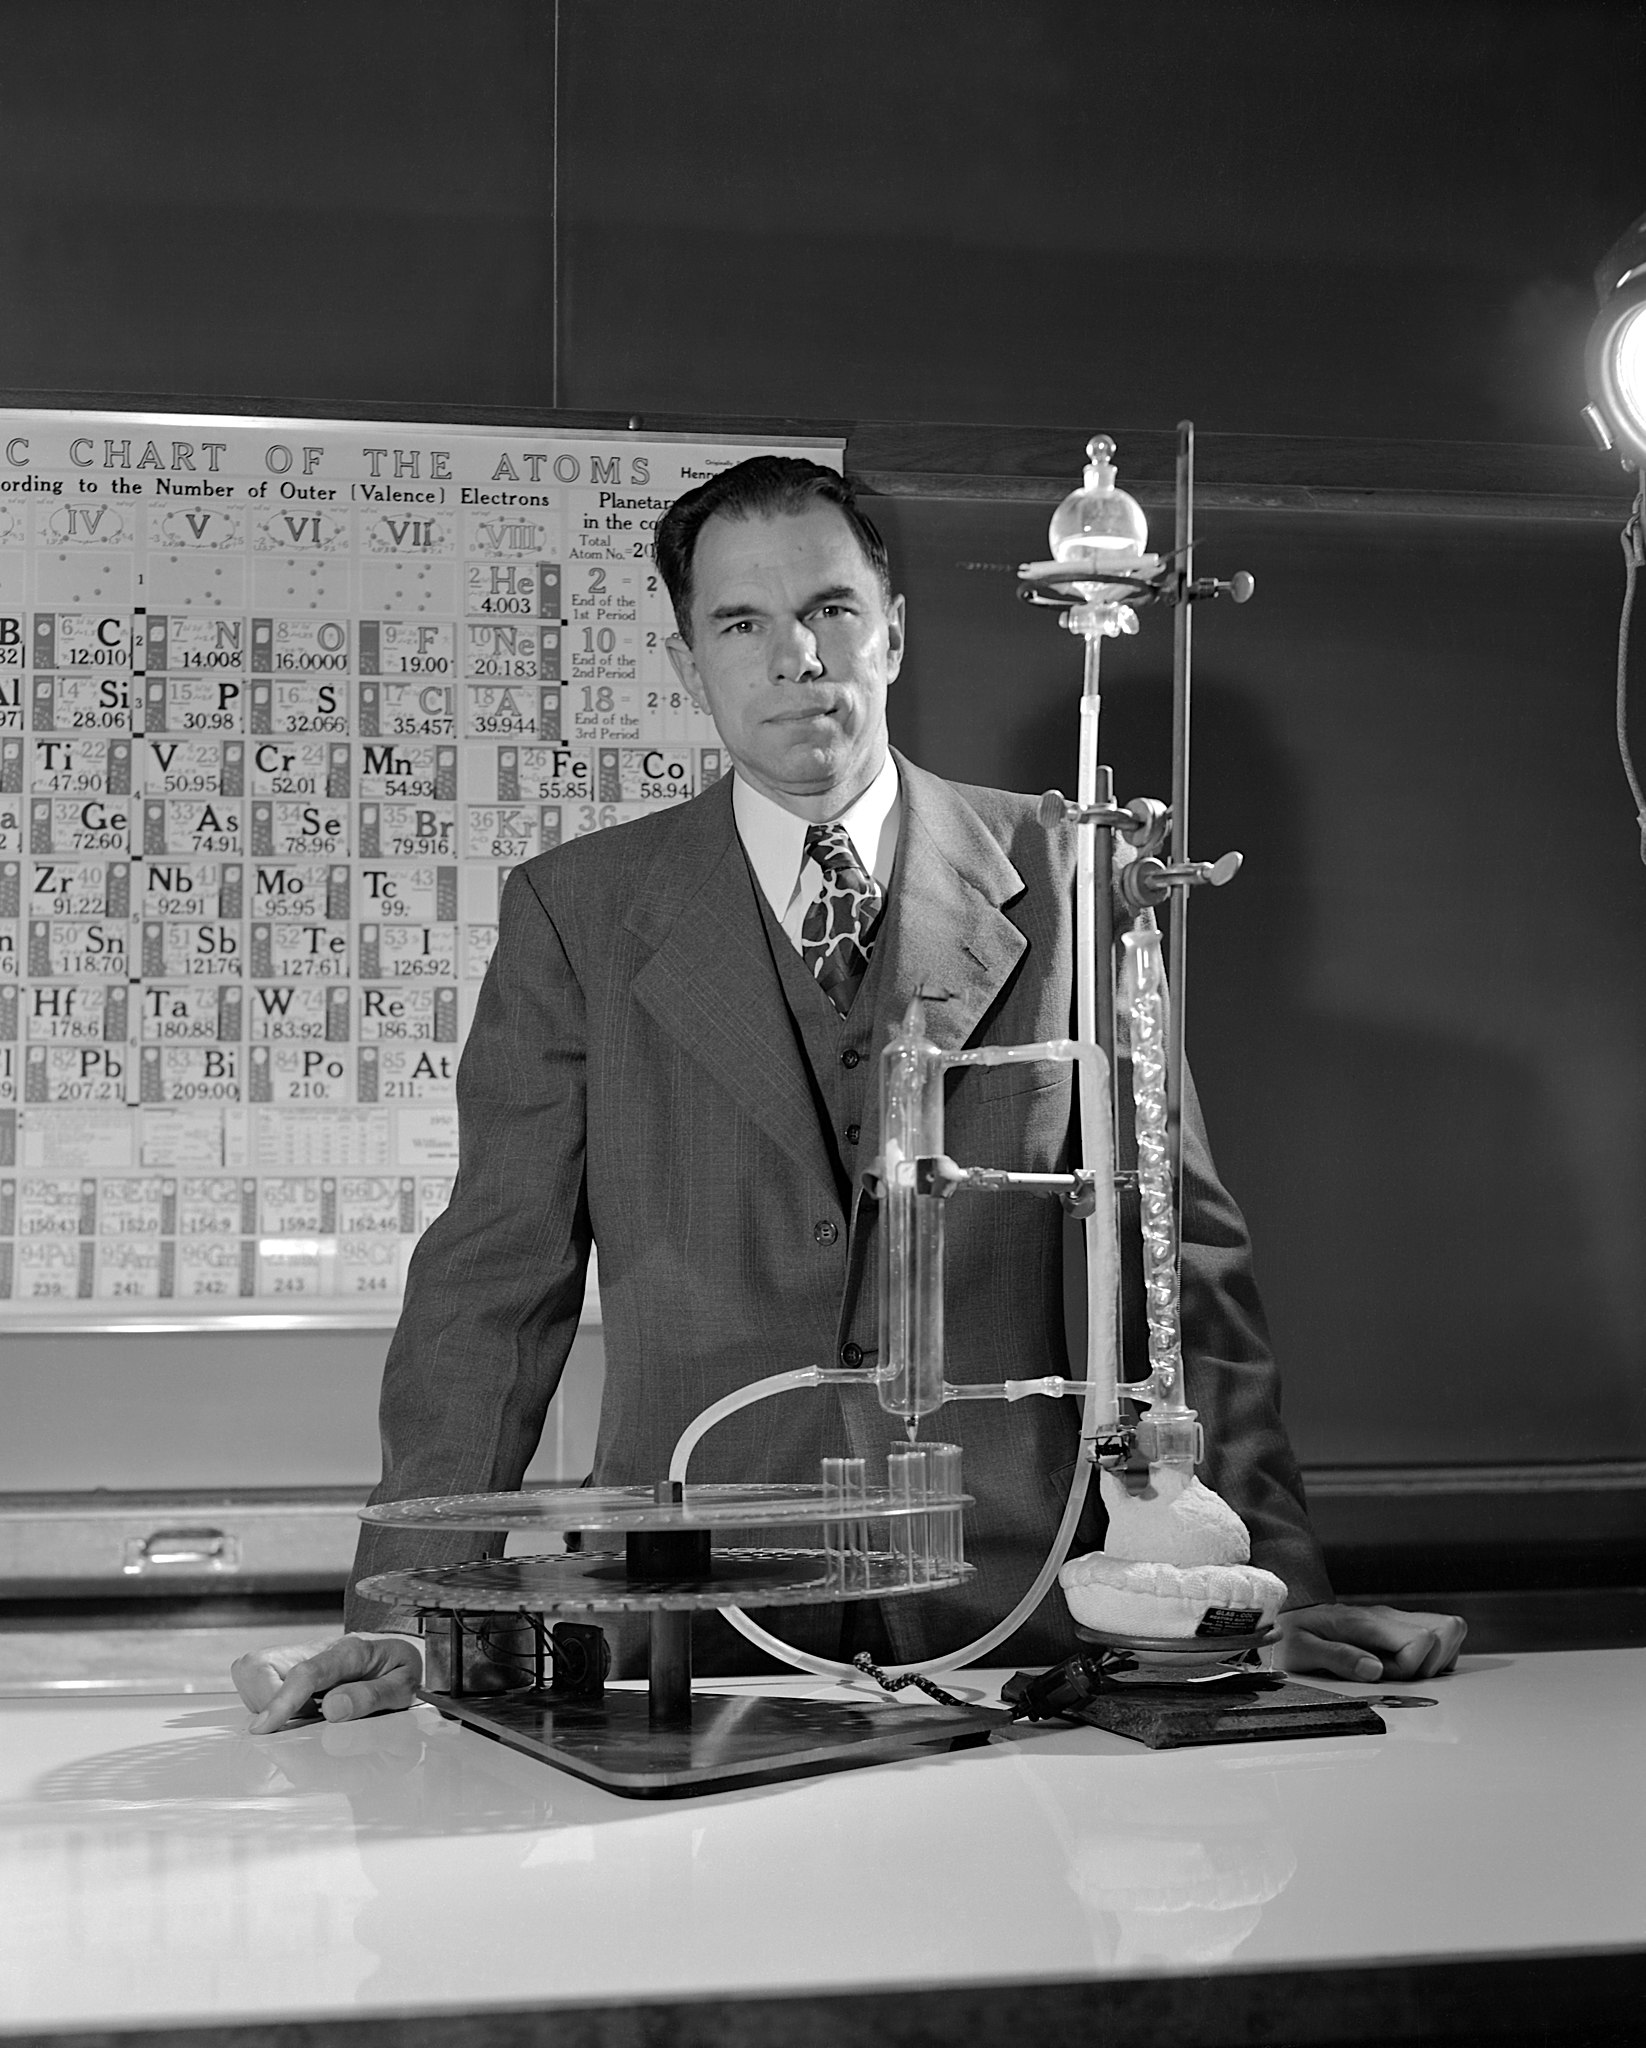 a man in a suit and tie standing in front of a machine.